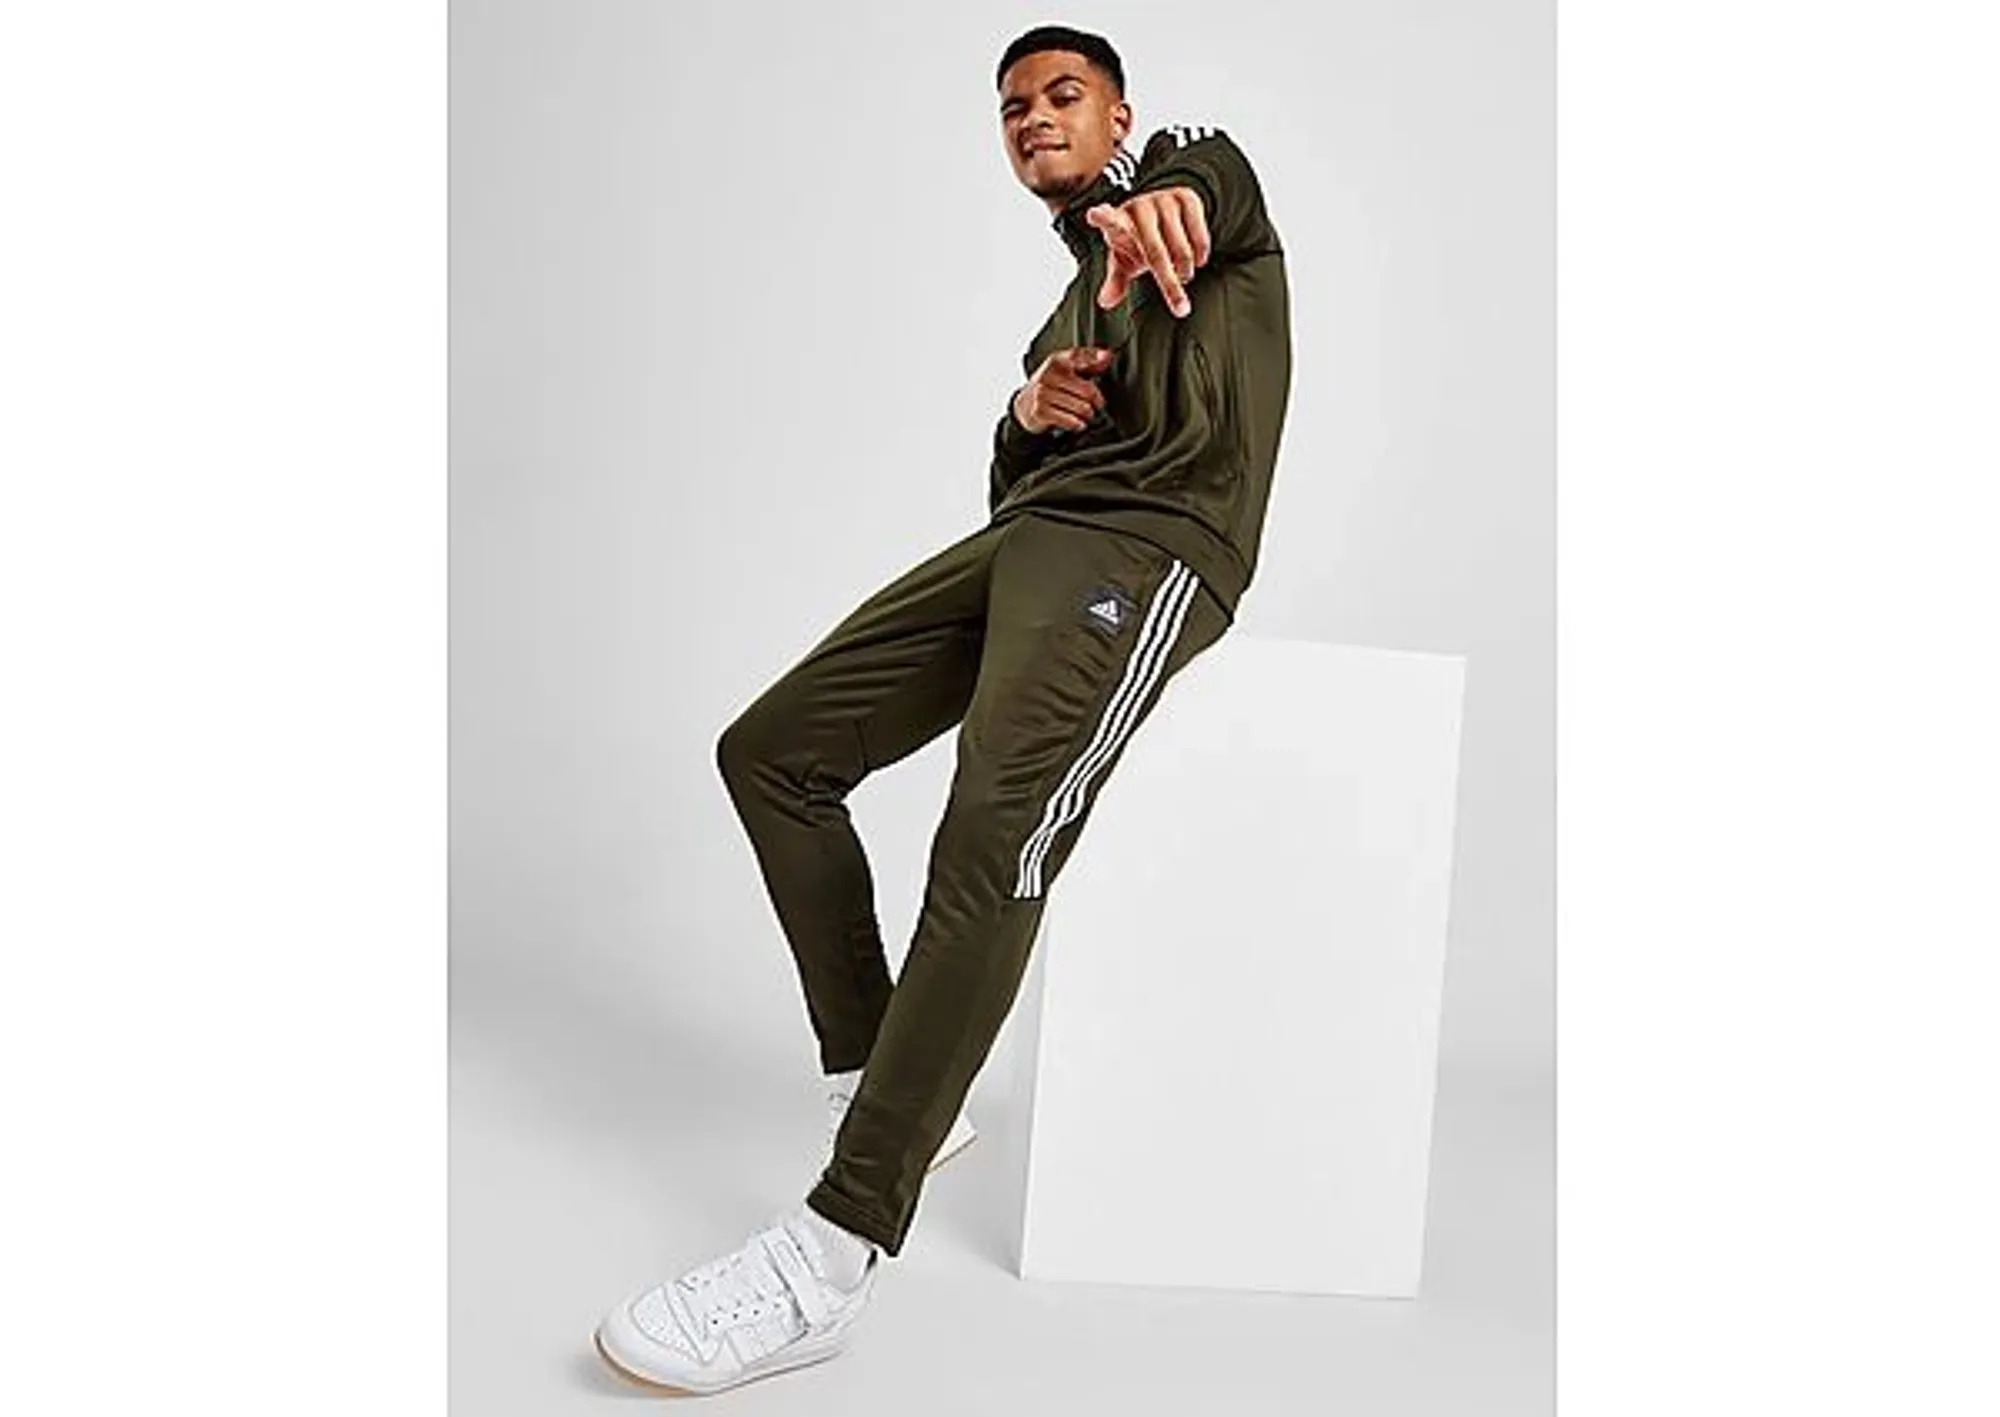 addidas white Adidas Track Pants, For Trecking,Sports at Rs 1999/pair in  Dehradun